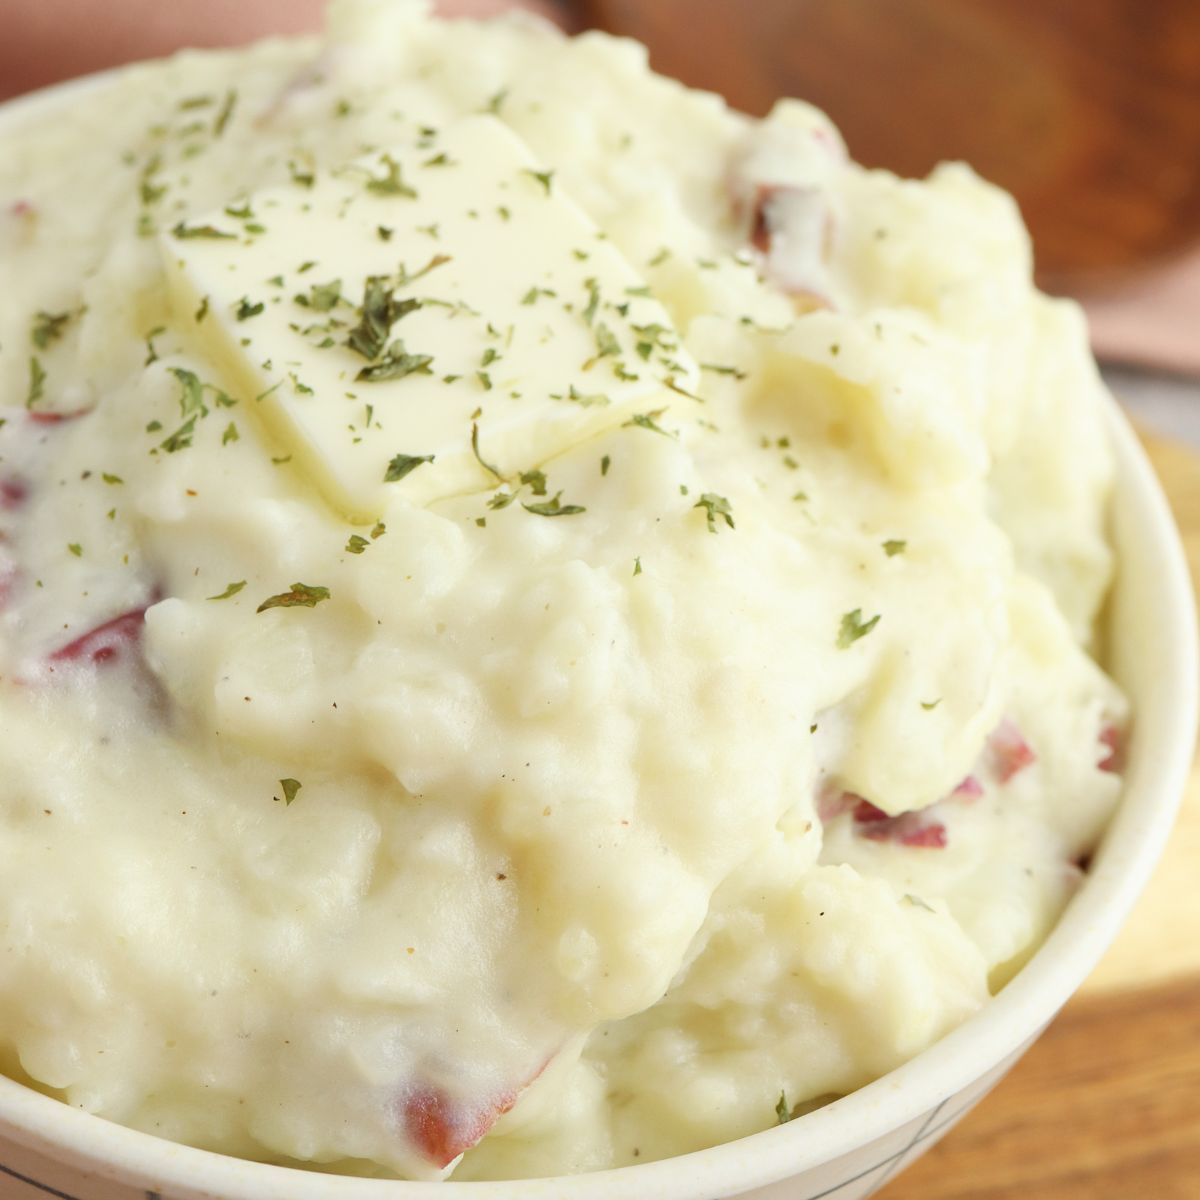 A bowl of mashed potatoes with ham and herbs.